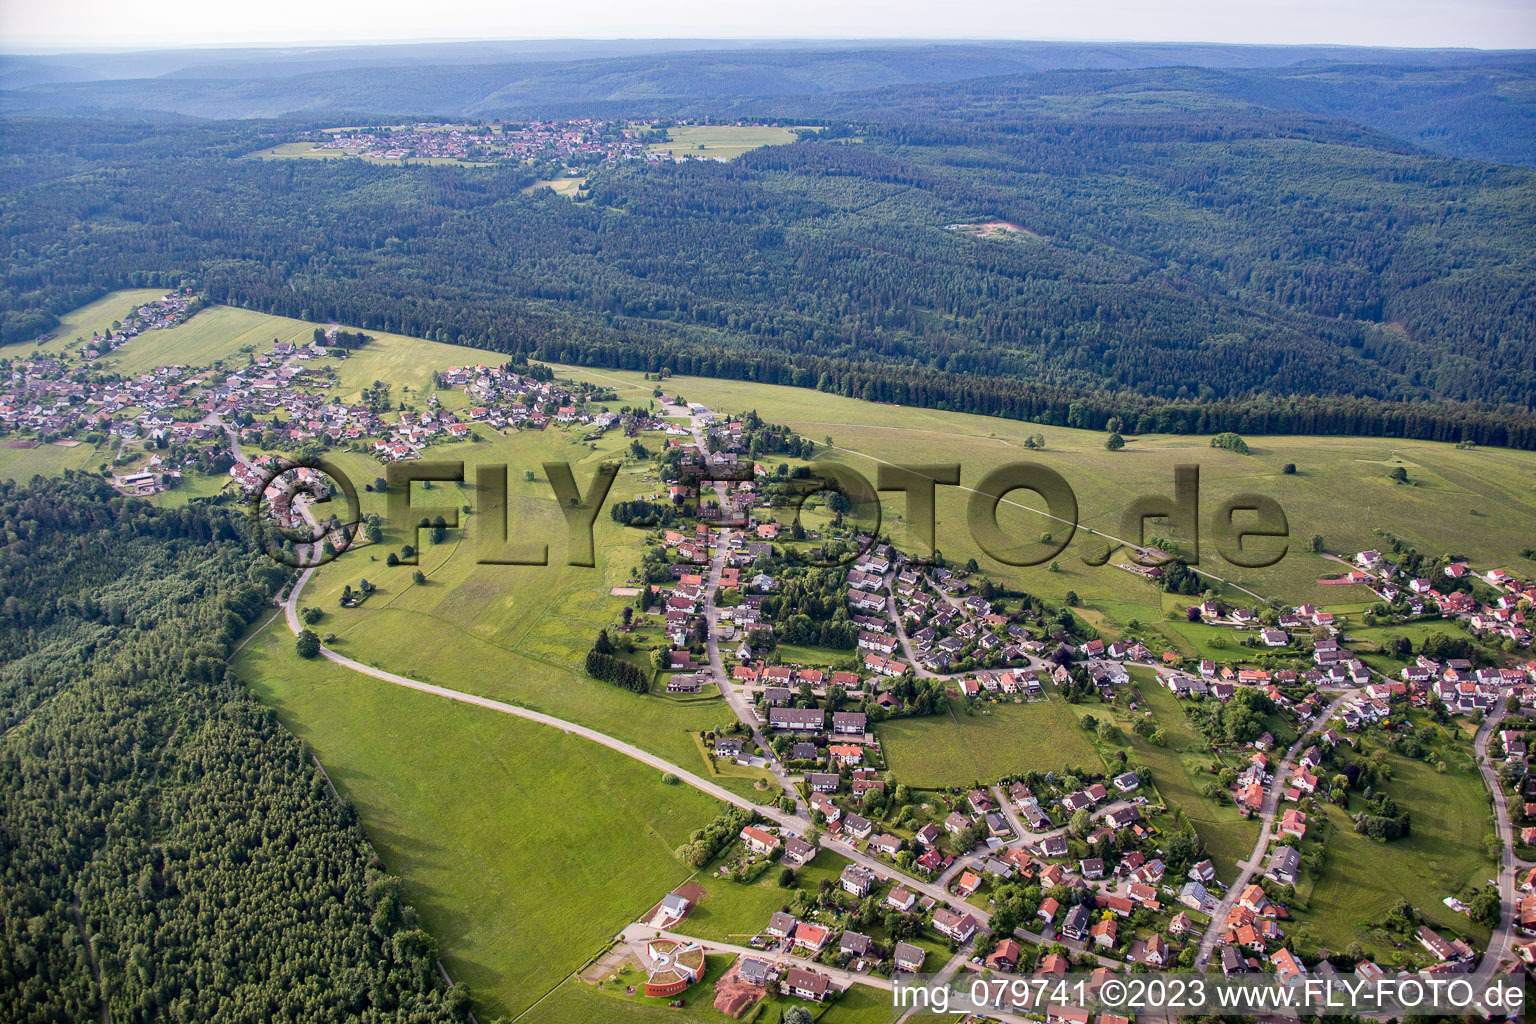 Quarterstr in the district Rotensol in Bad Herrenalb in the state Baden-Wuerttemberg, Germany